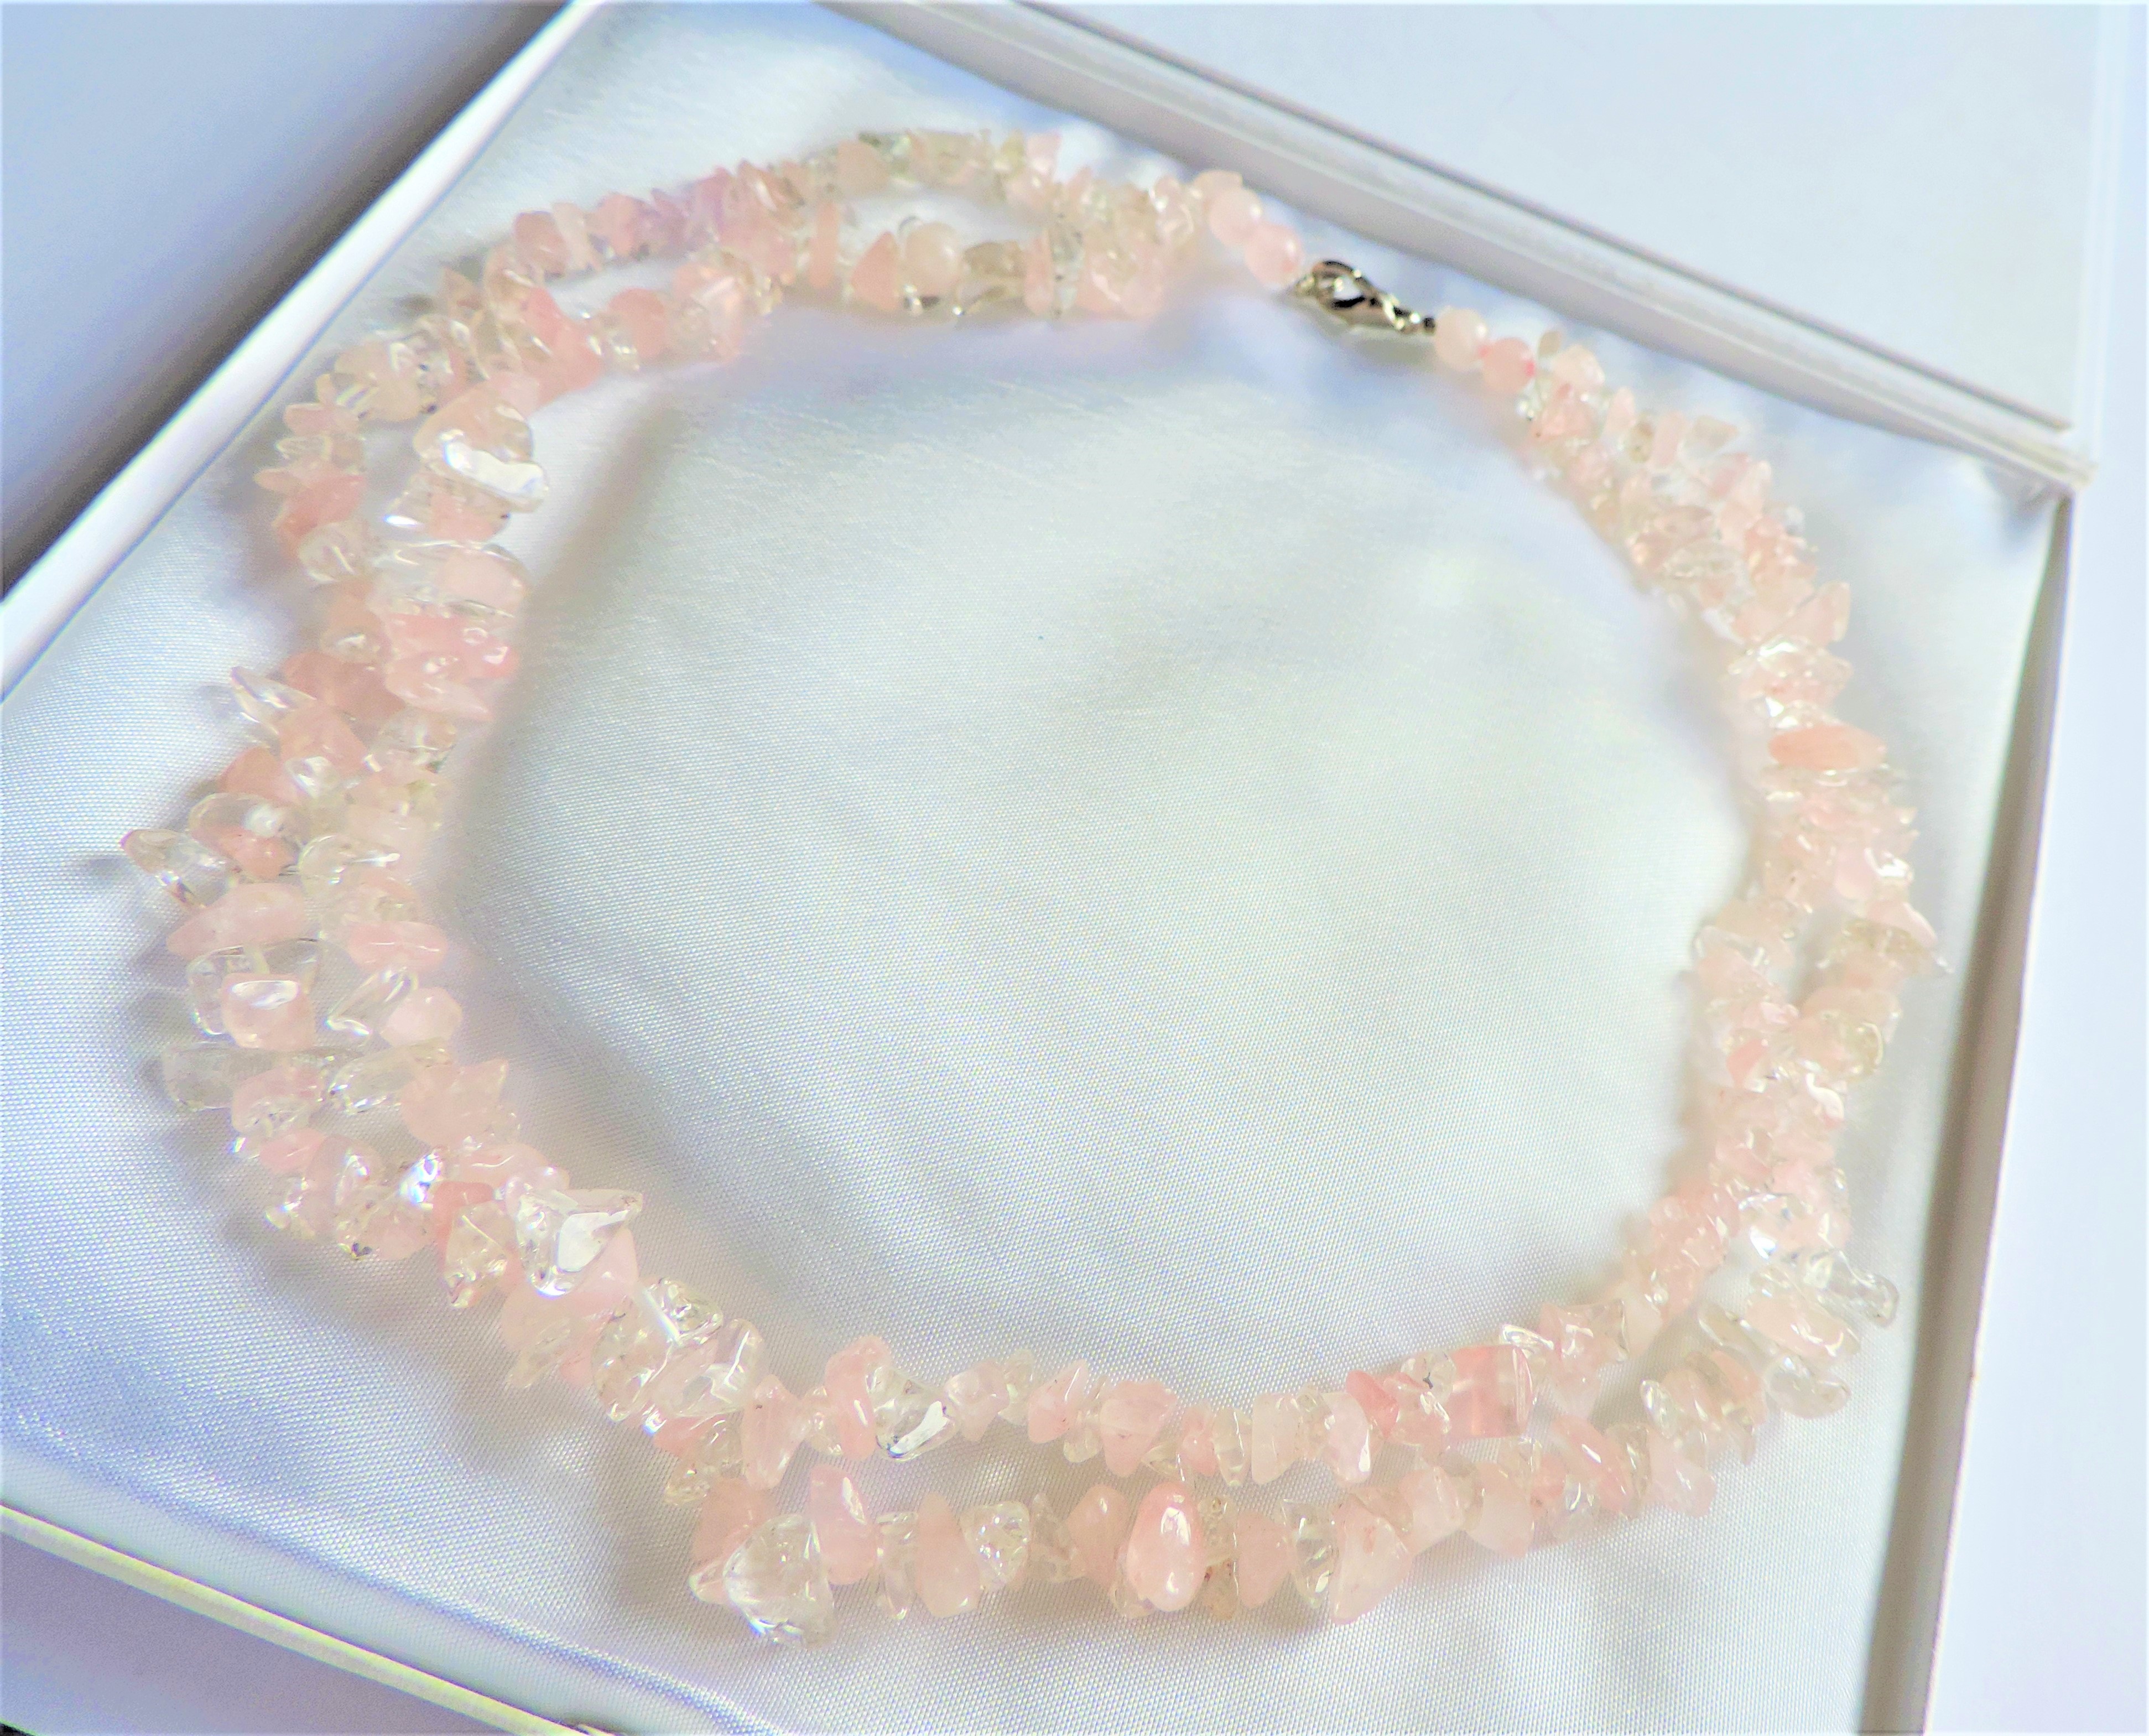 Twin Strand Rose Quartz Gemstone Necklace with Gift Pouch - Image 2 of 2